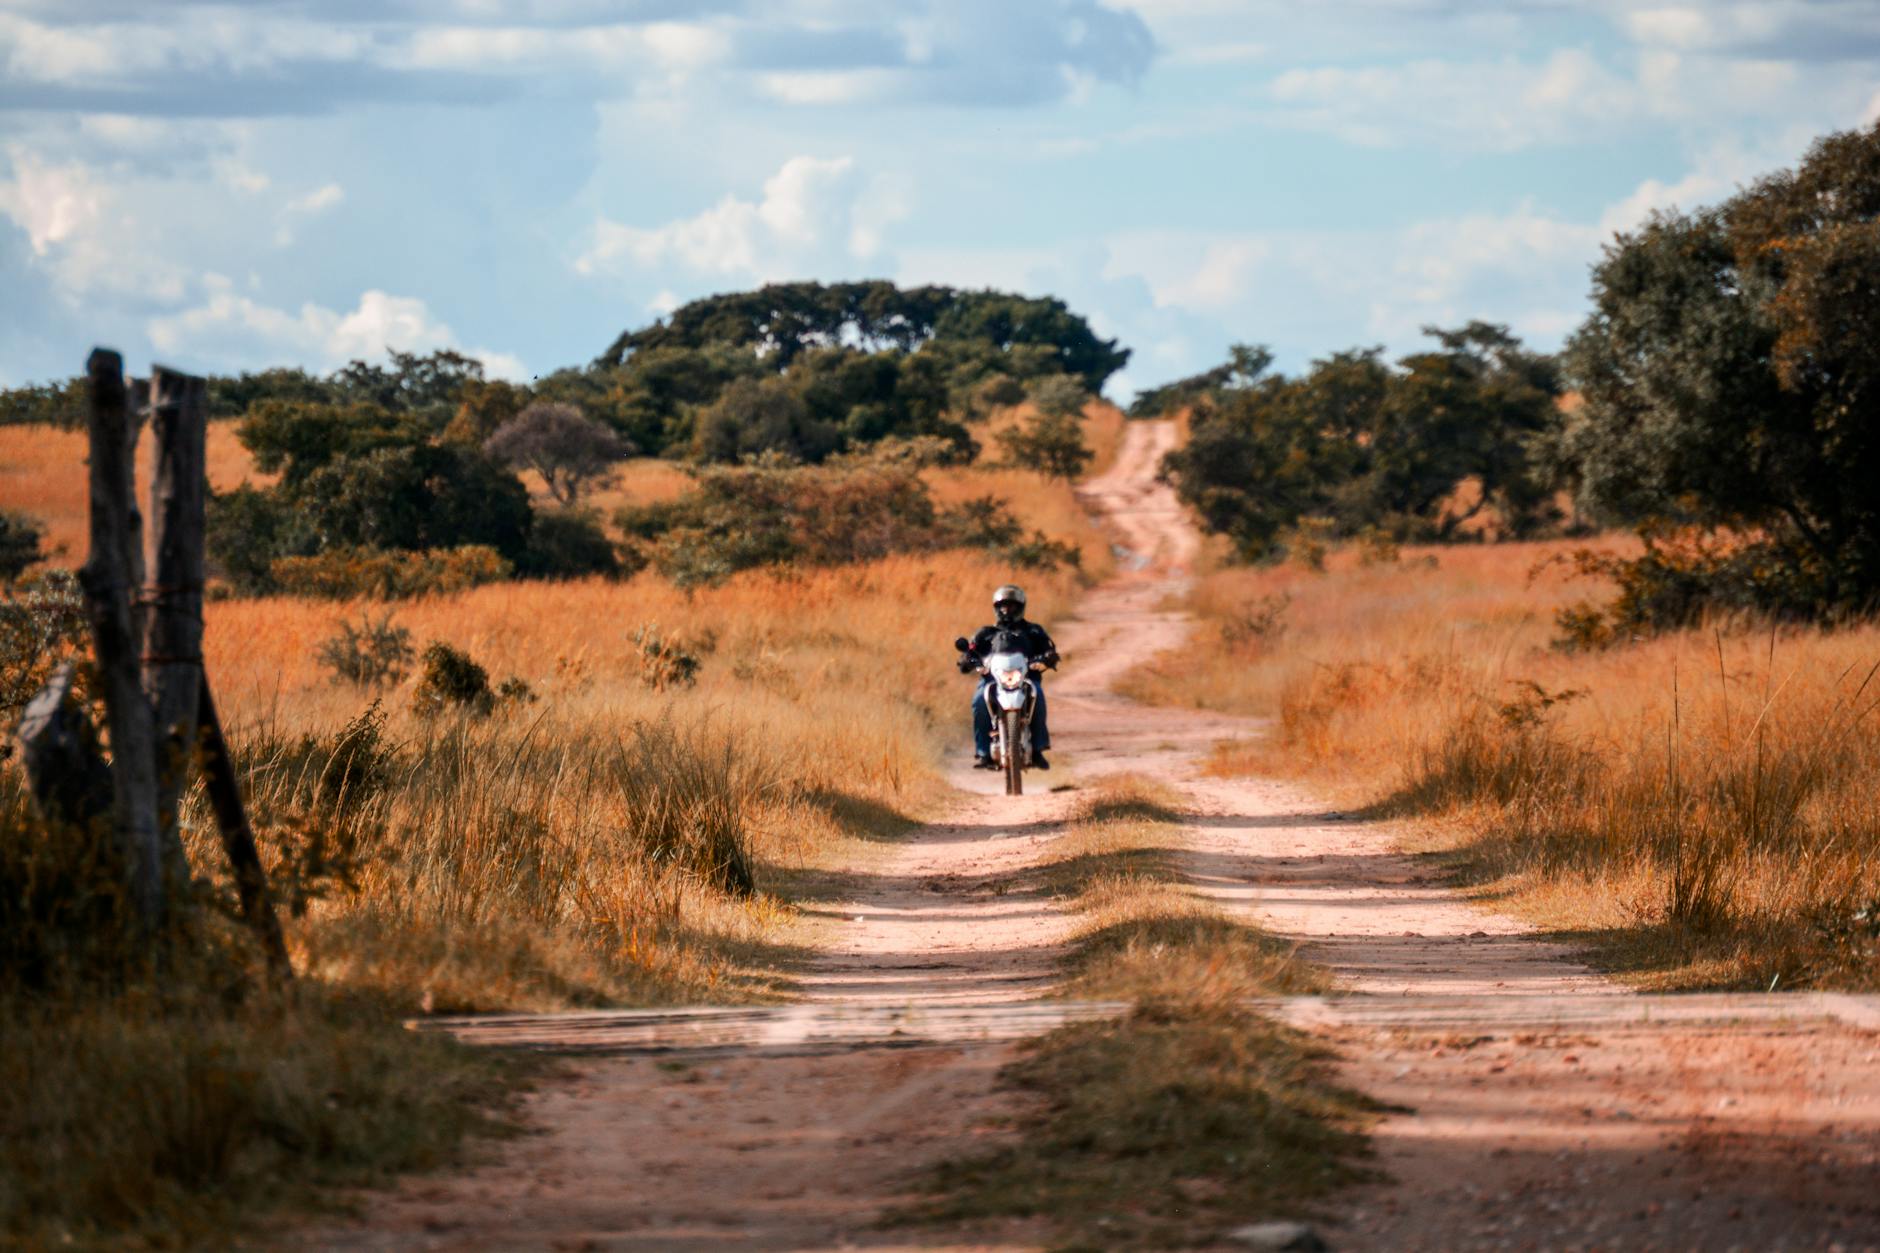 motorcyclist riding on a dirt road in the wilderness